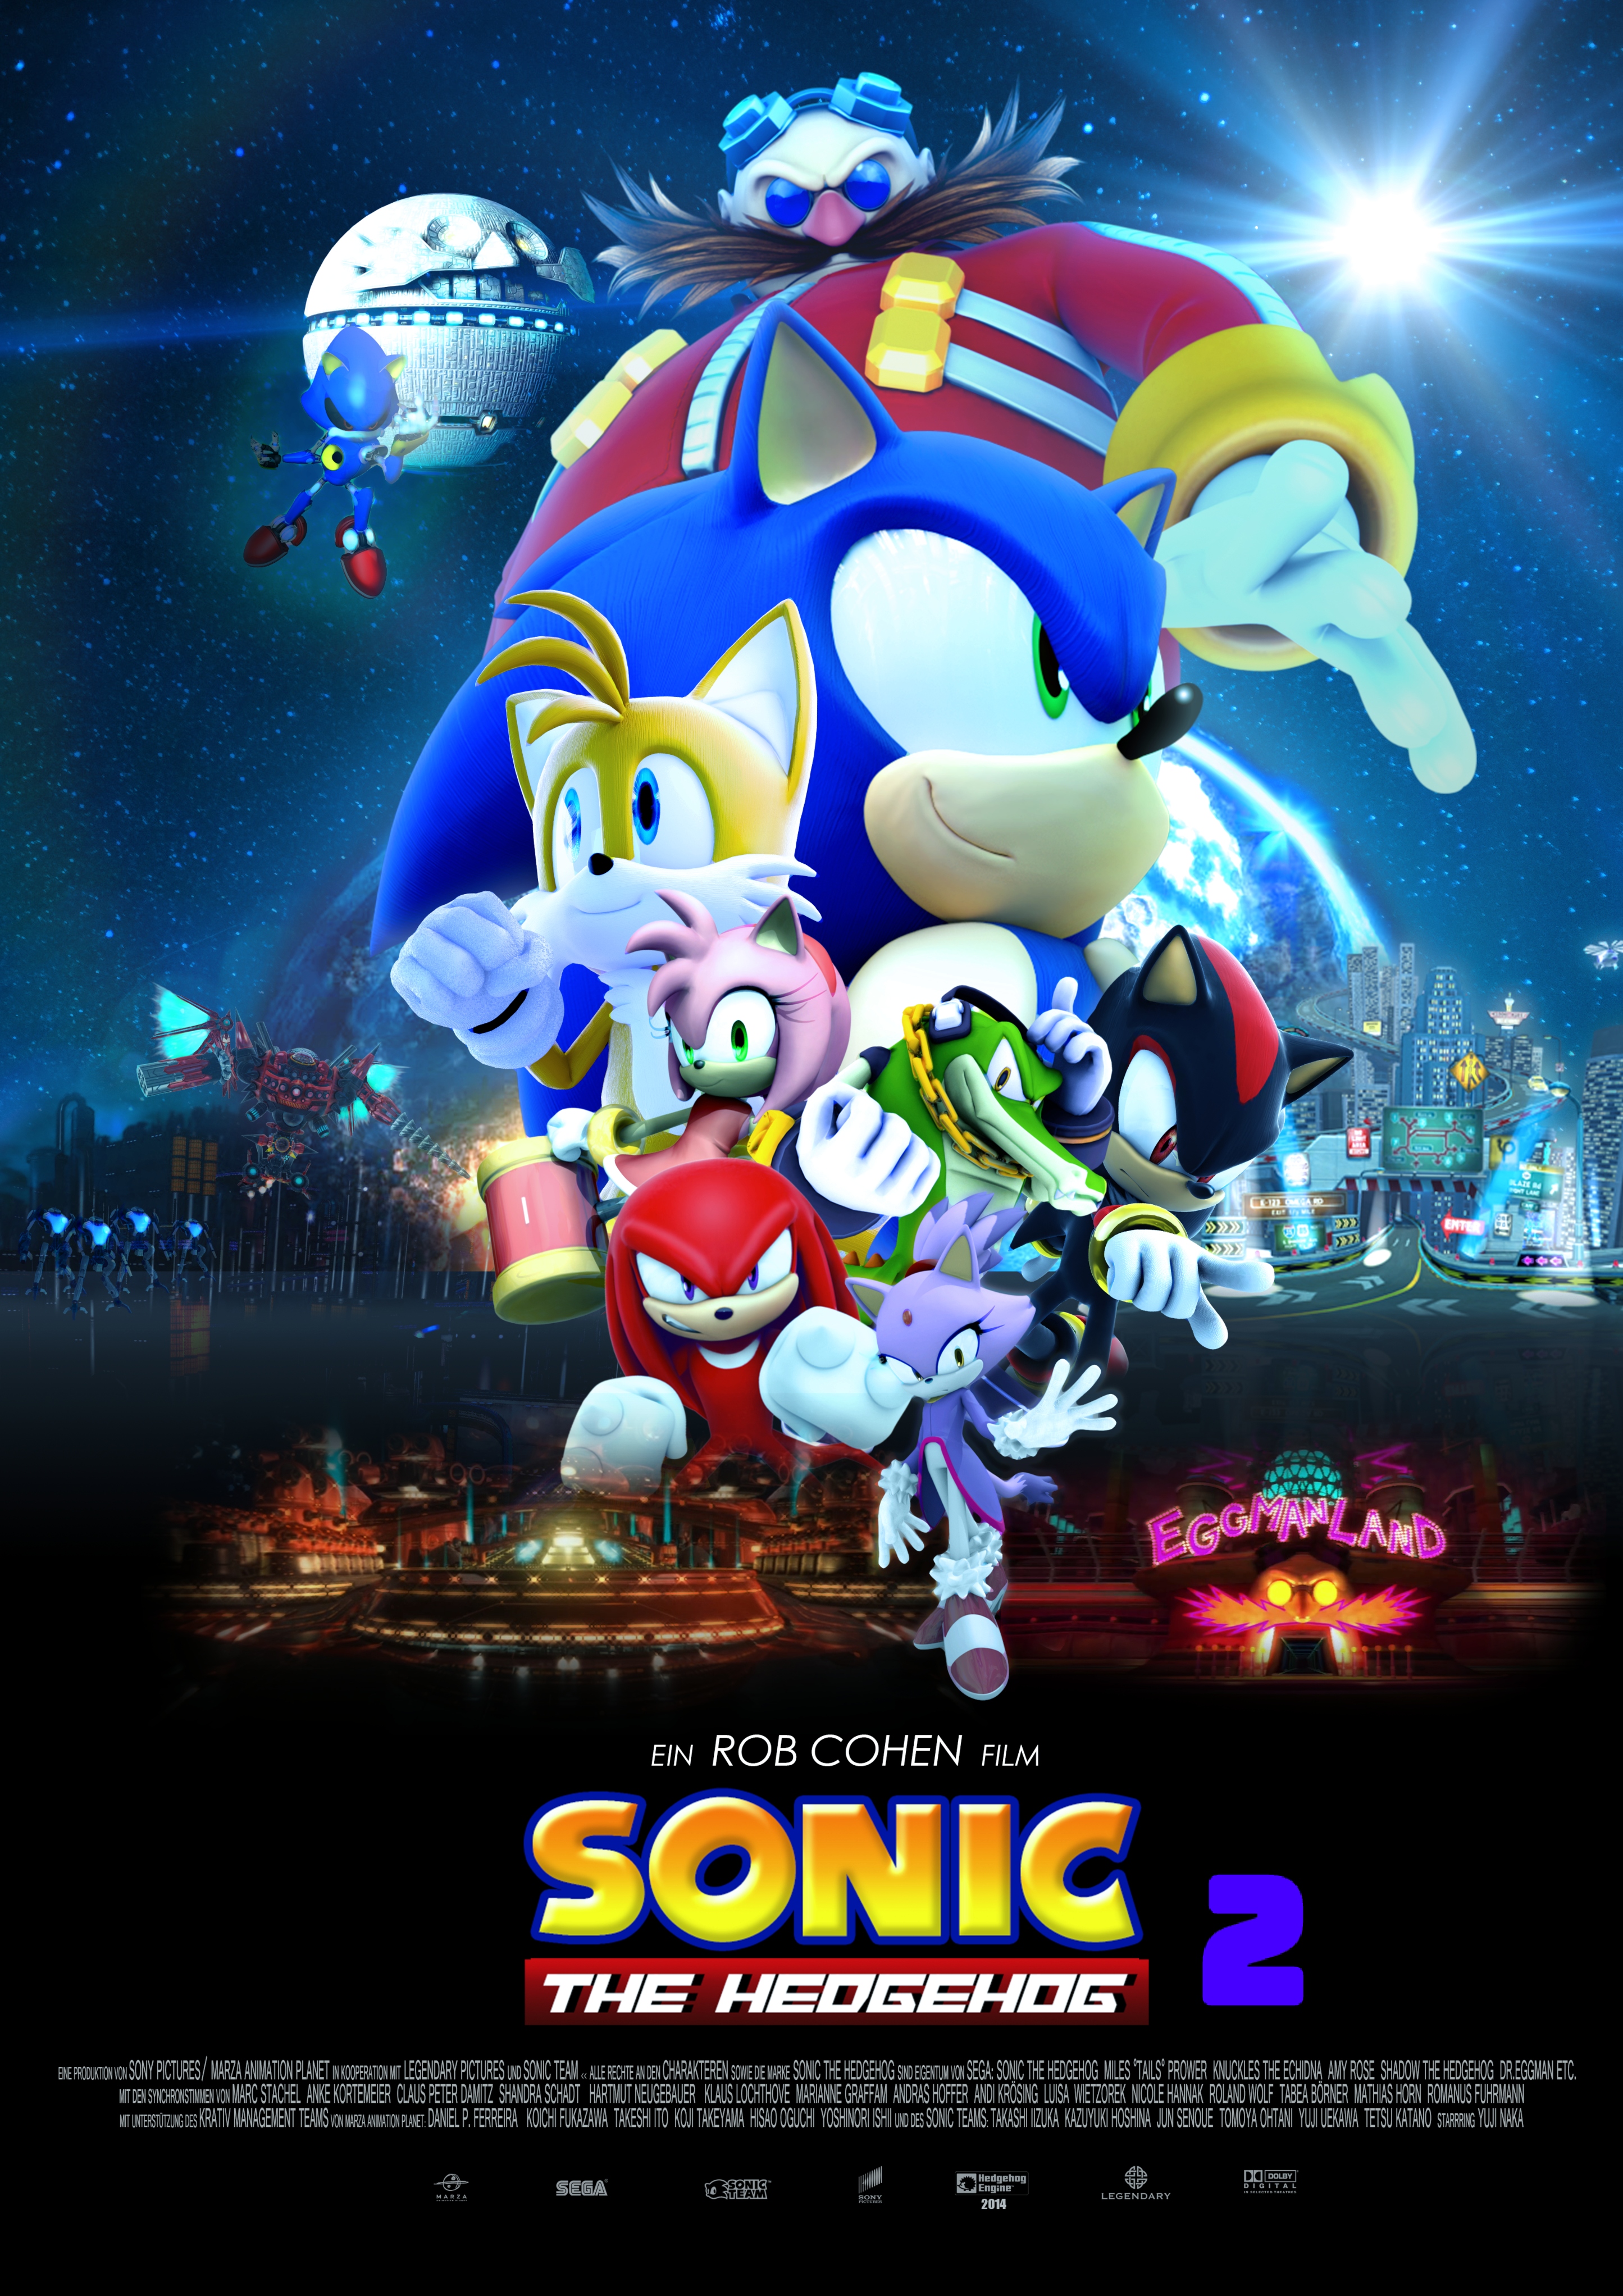 The date release hedgehog sonic 2 Sonic the